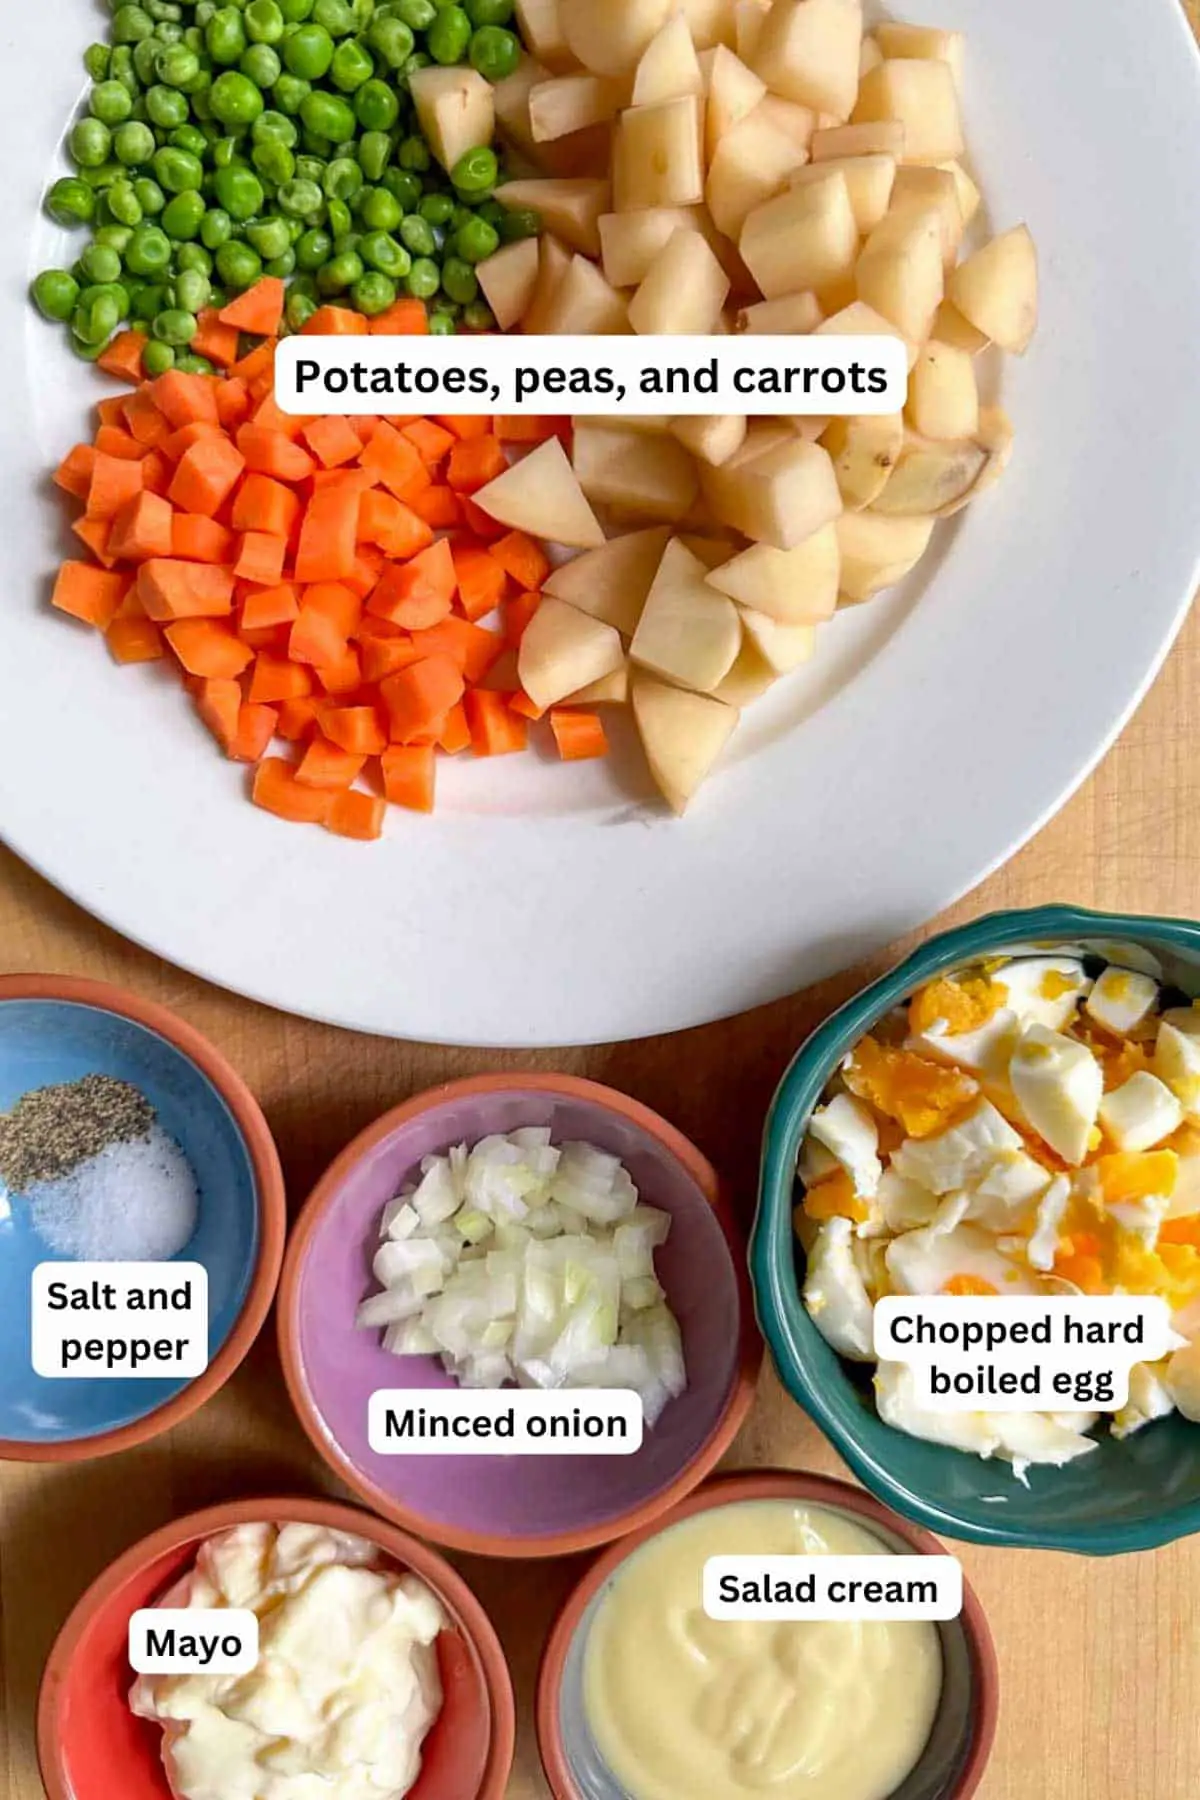 A white plate with pieces of potato and carrot cut into small pieces, and sweet peas; bowls with salt and pepper, minced onion, chopped hard boiled egg, mayo and salad cream.